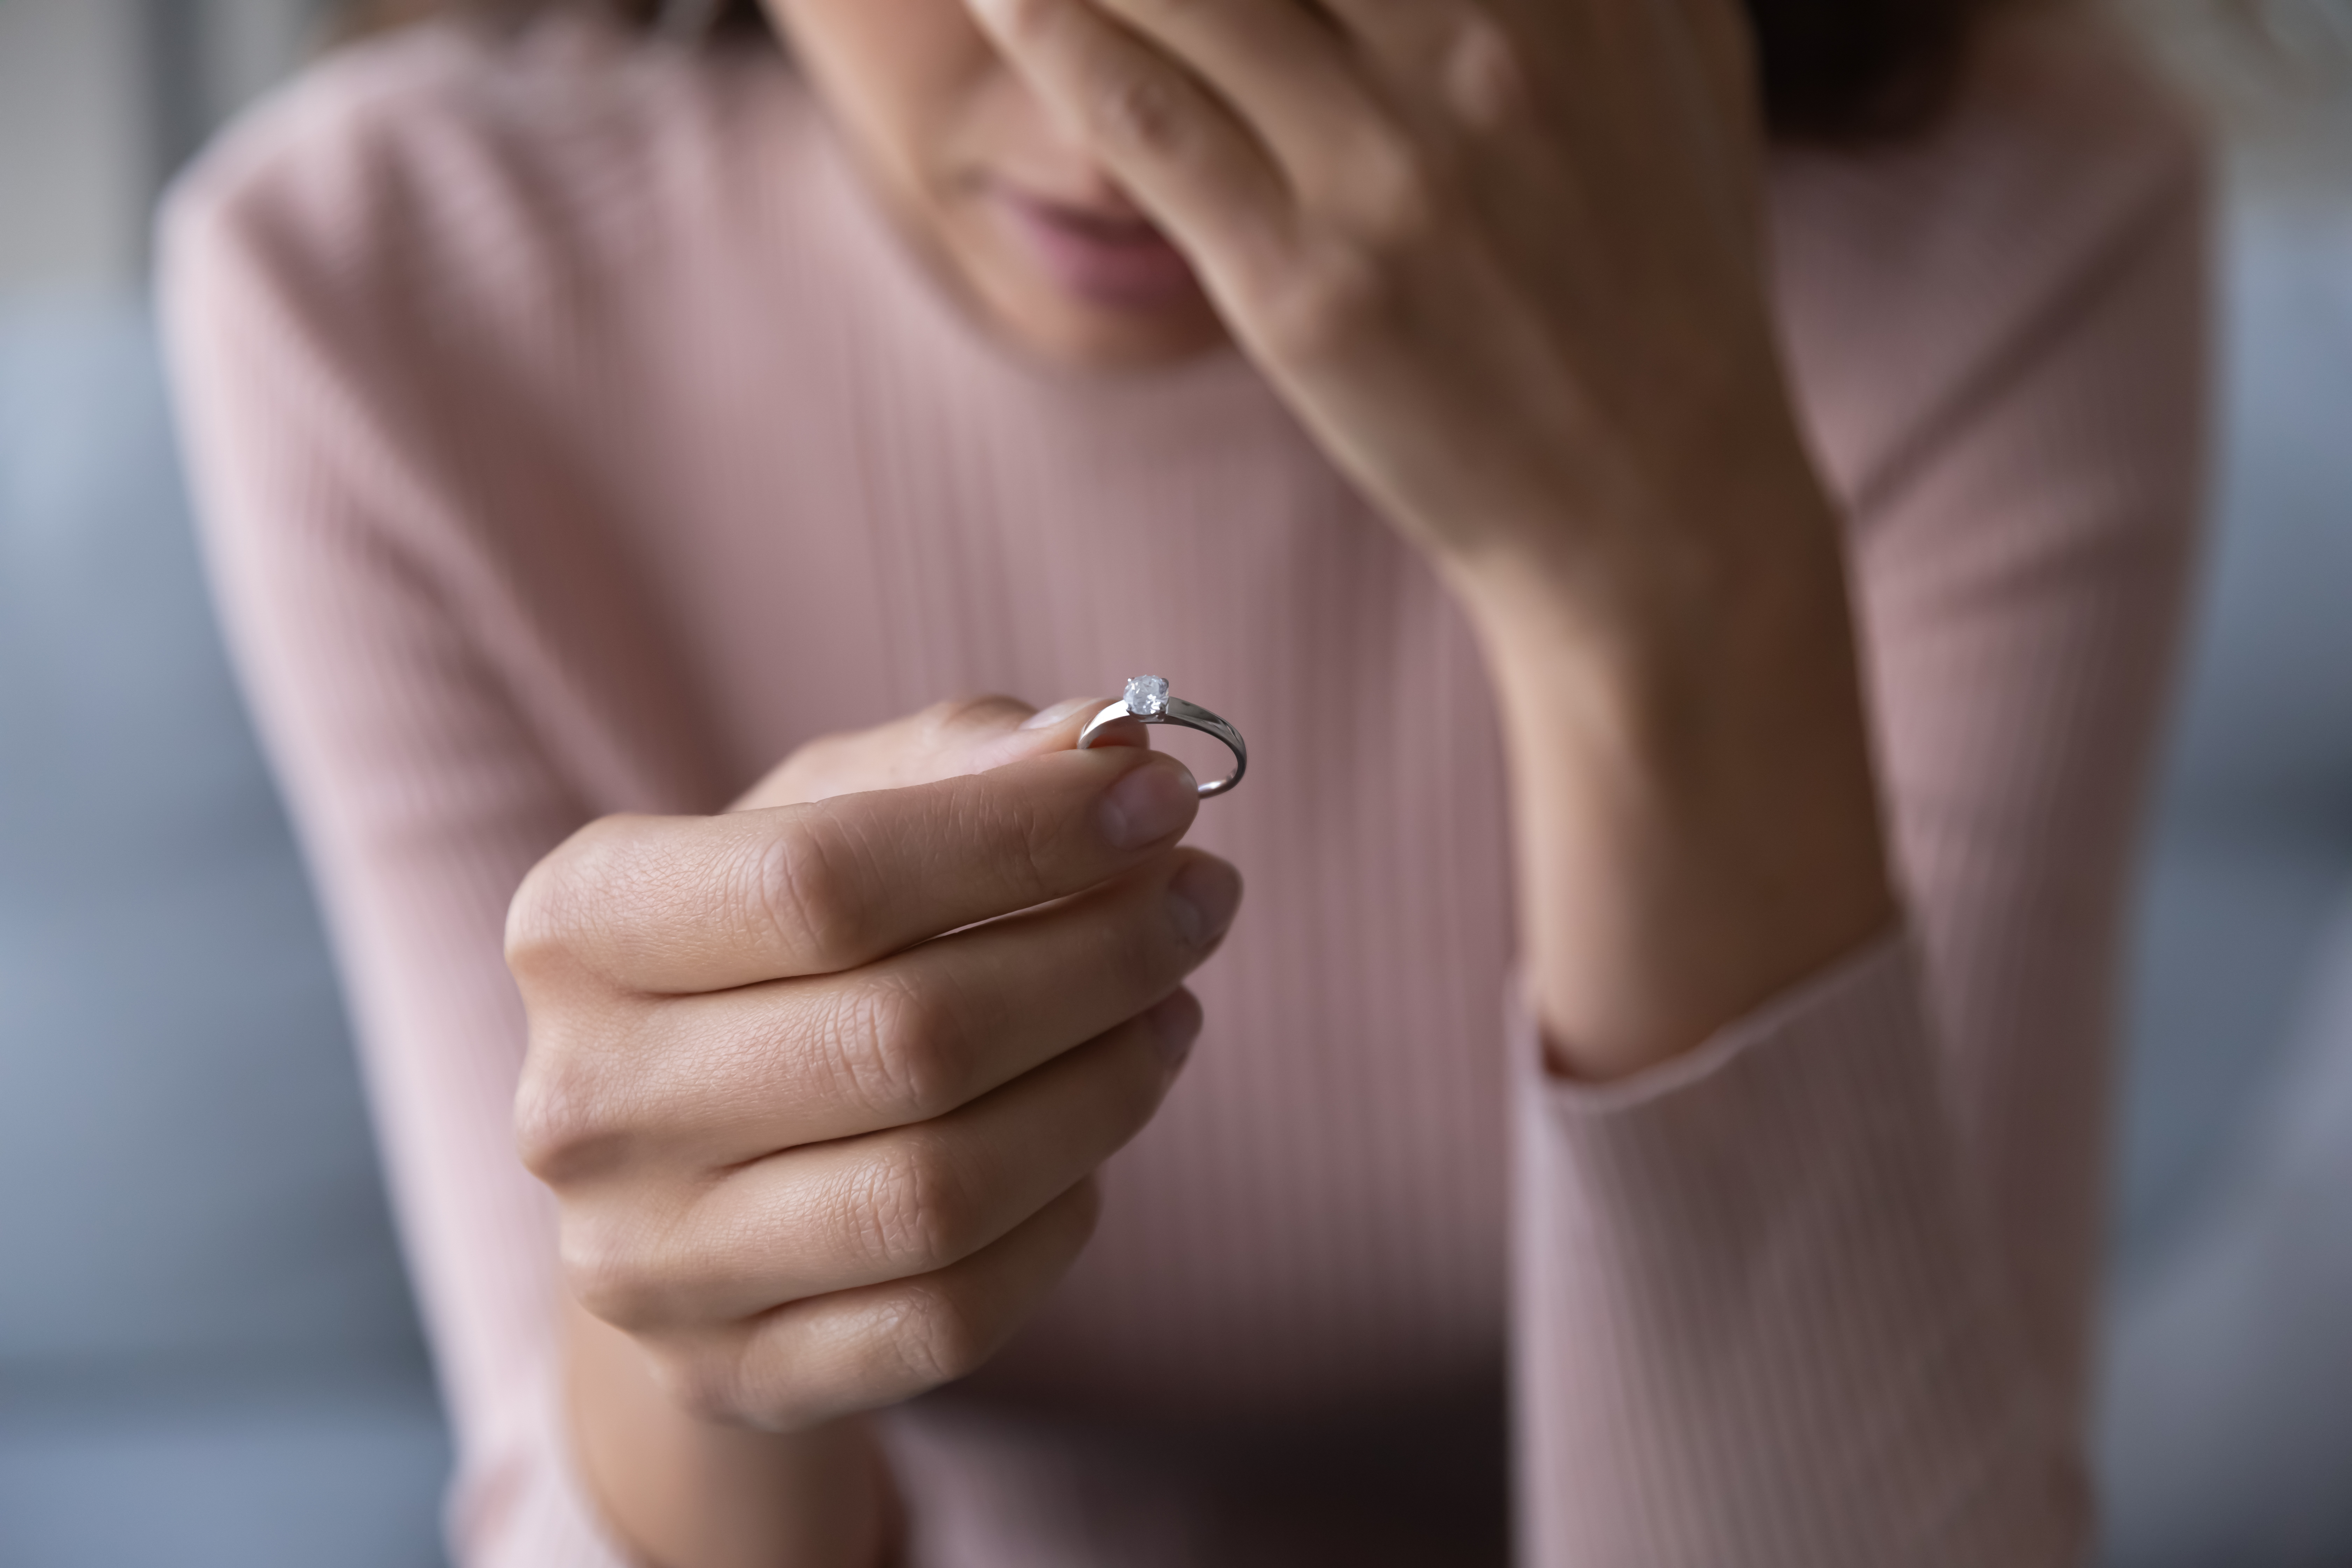 A sad woman holding a ring | Source: Shutterstock